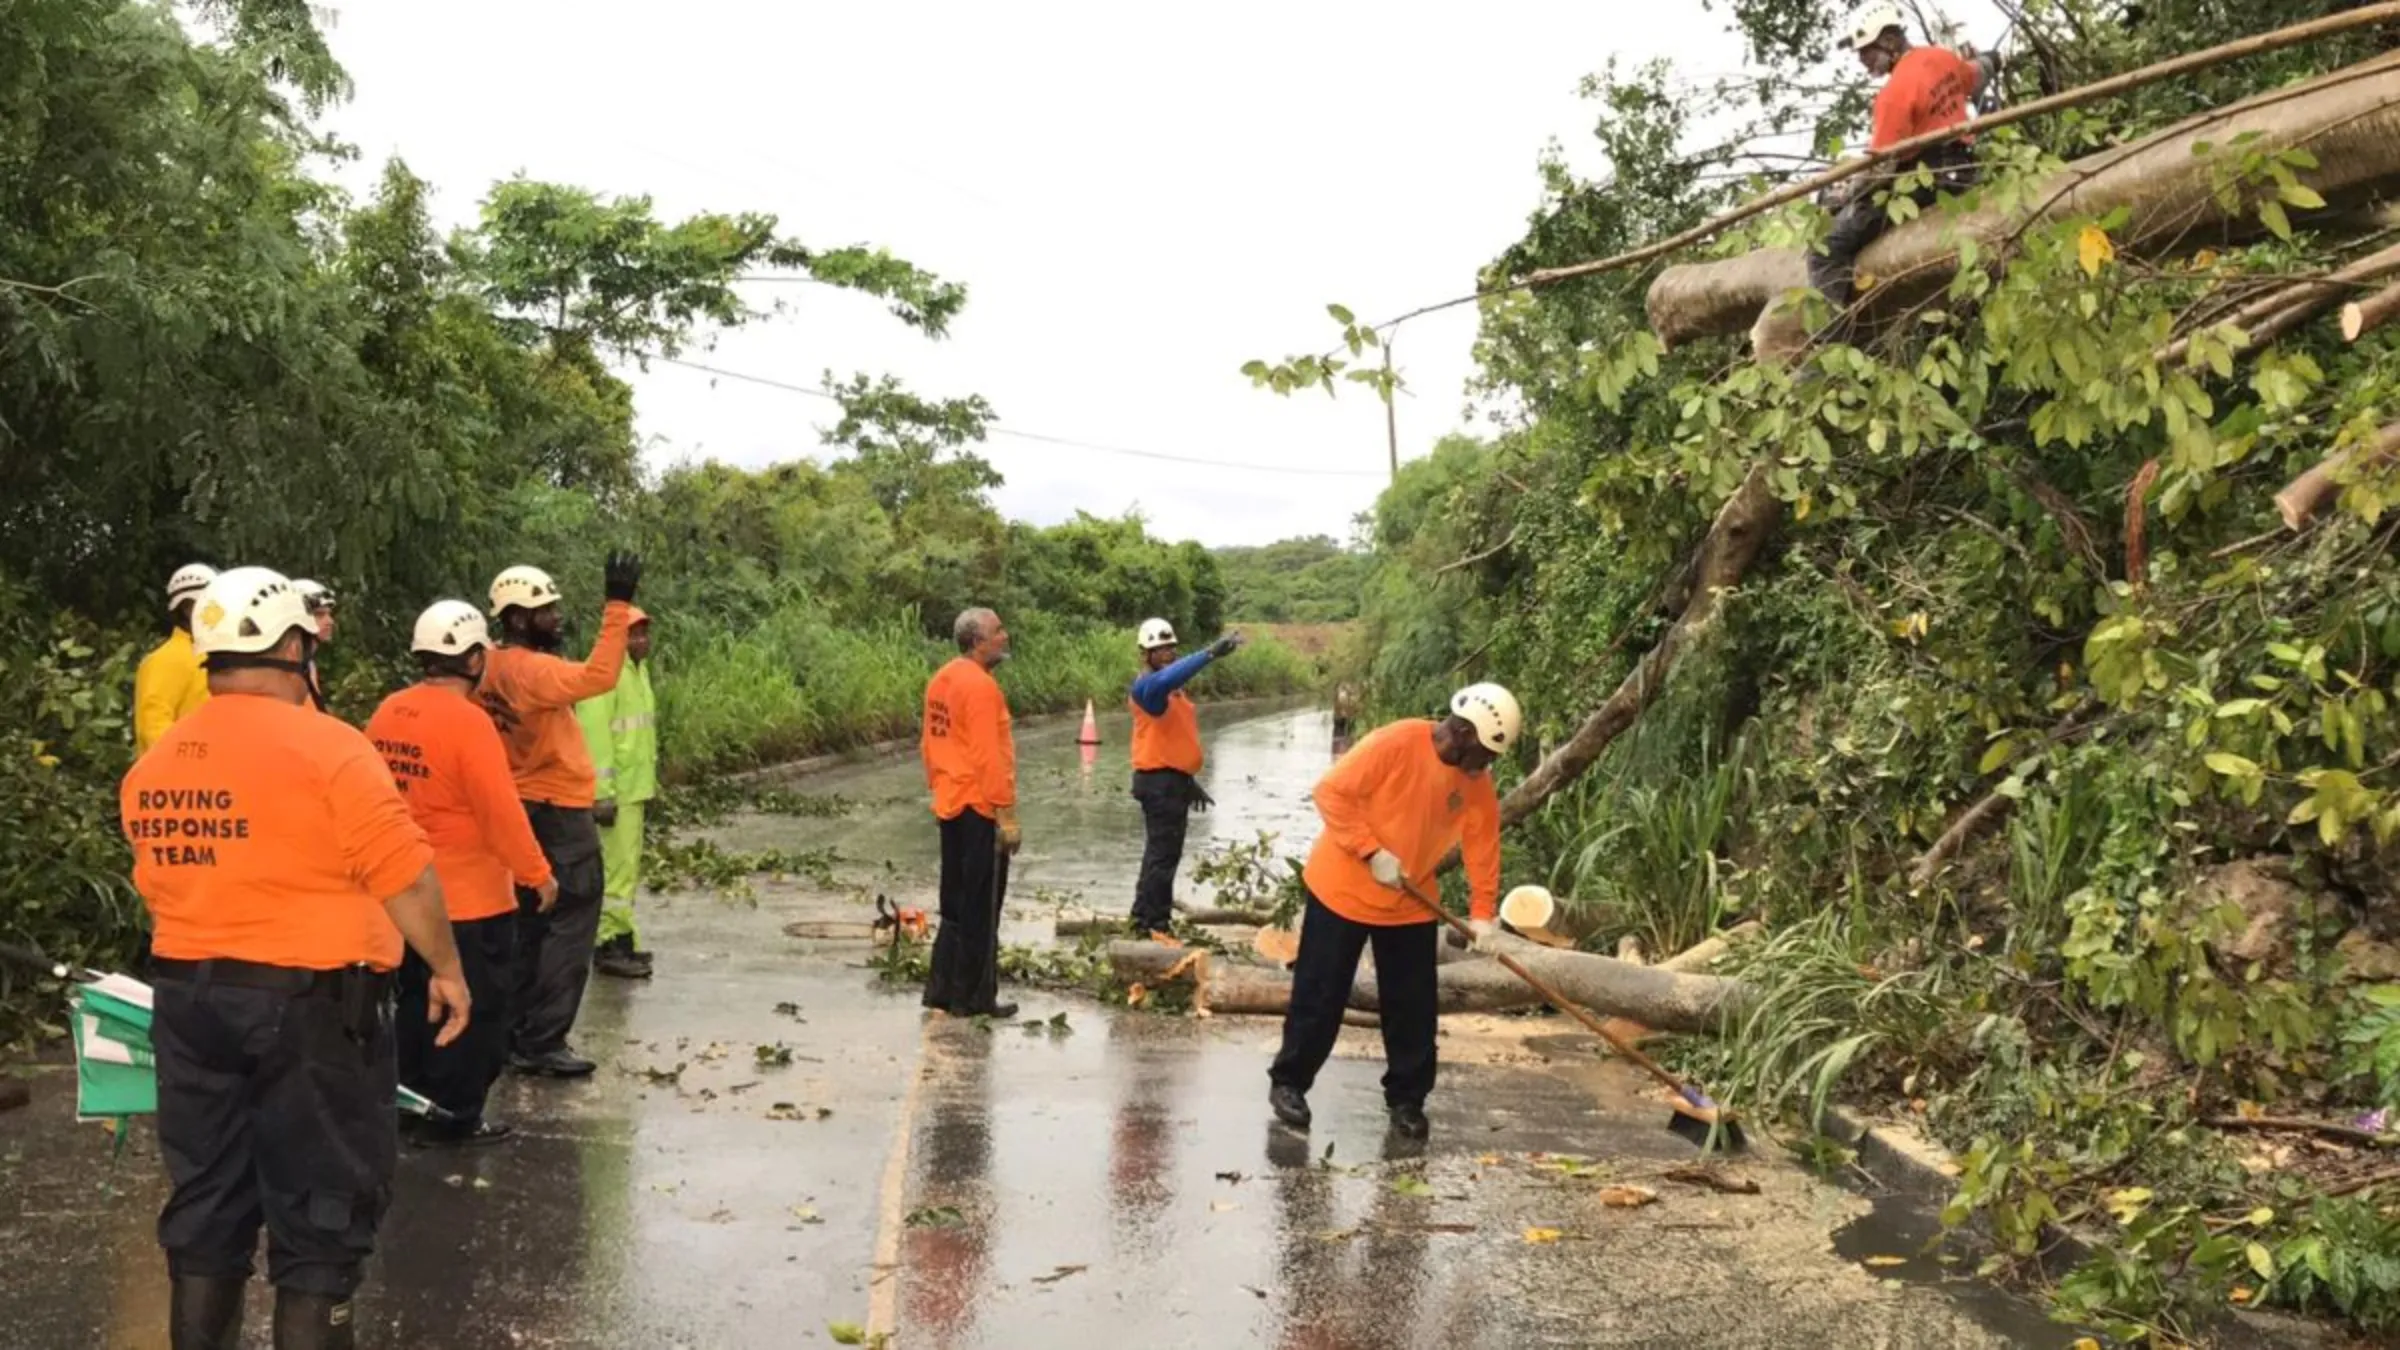 Volunteer members of the Roving Response Team remove a tree blocking a road after Tropical Storm Dorian passed overnight in Brighton St. George, Barbados August 27, 2019. REUTERS/Nigel R Browne